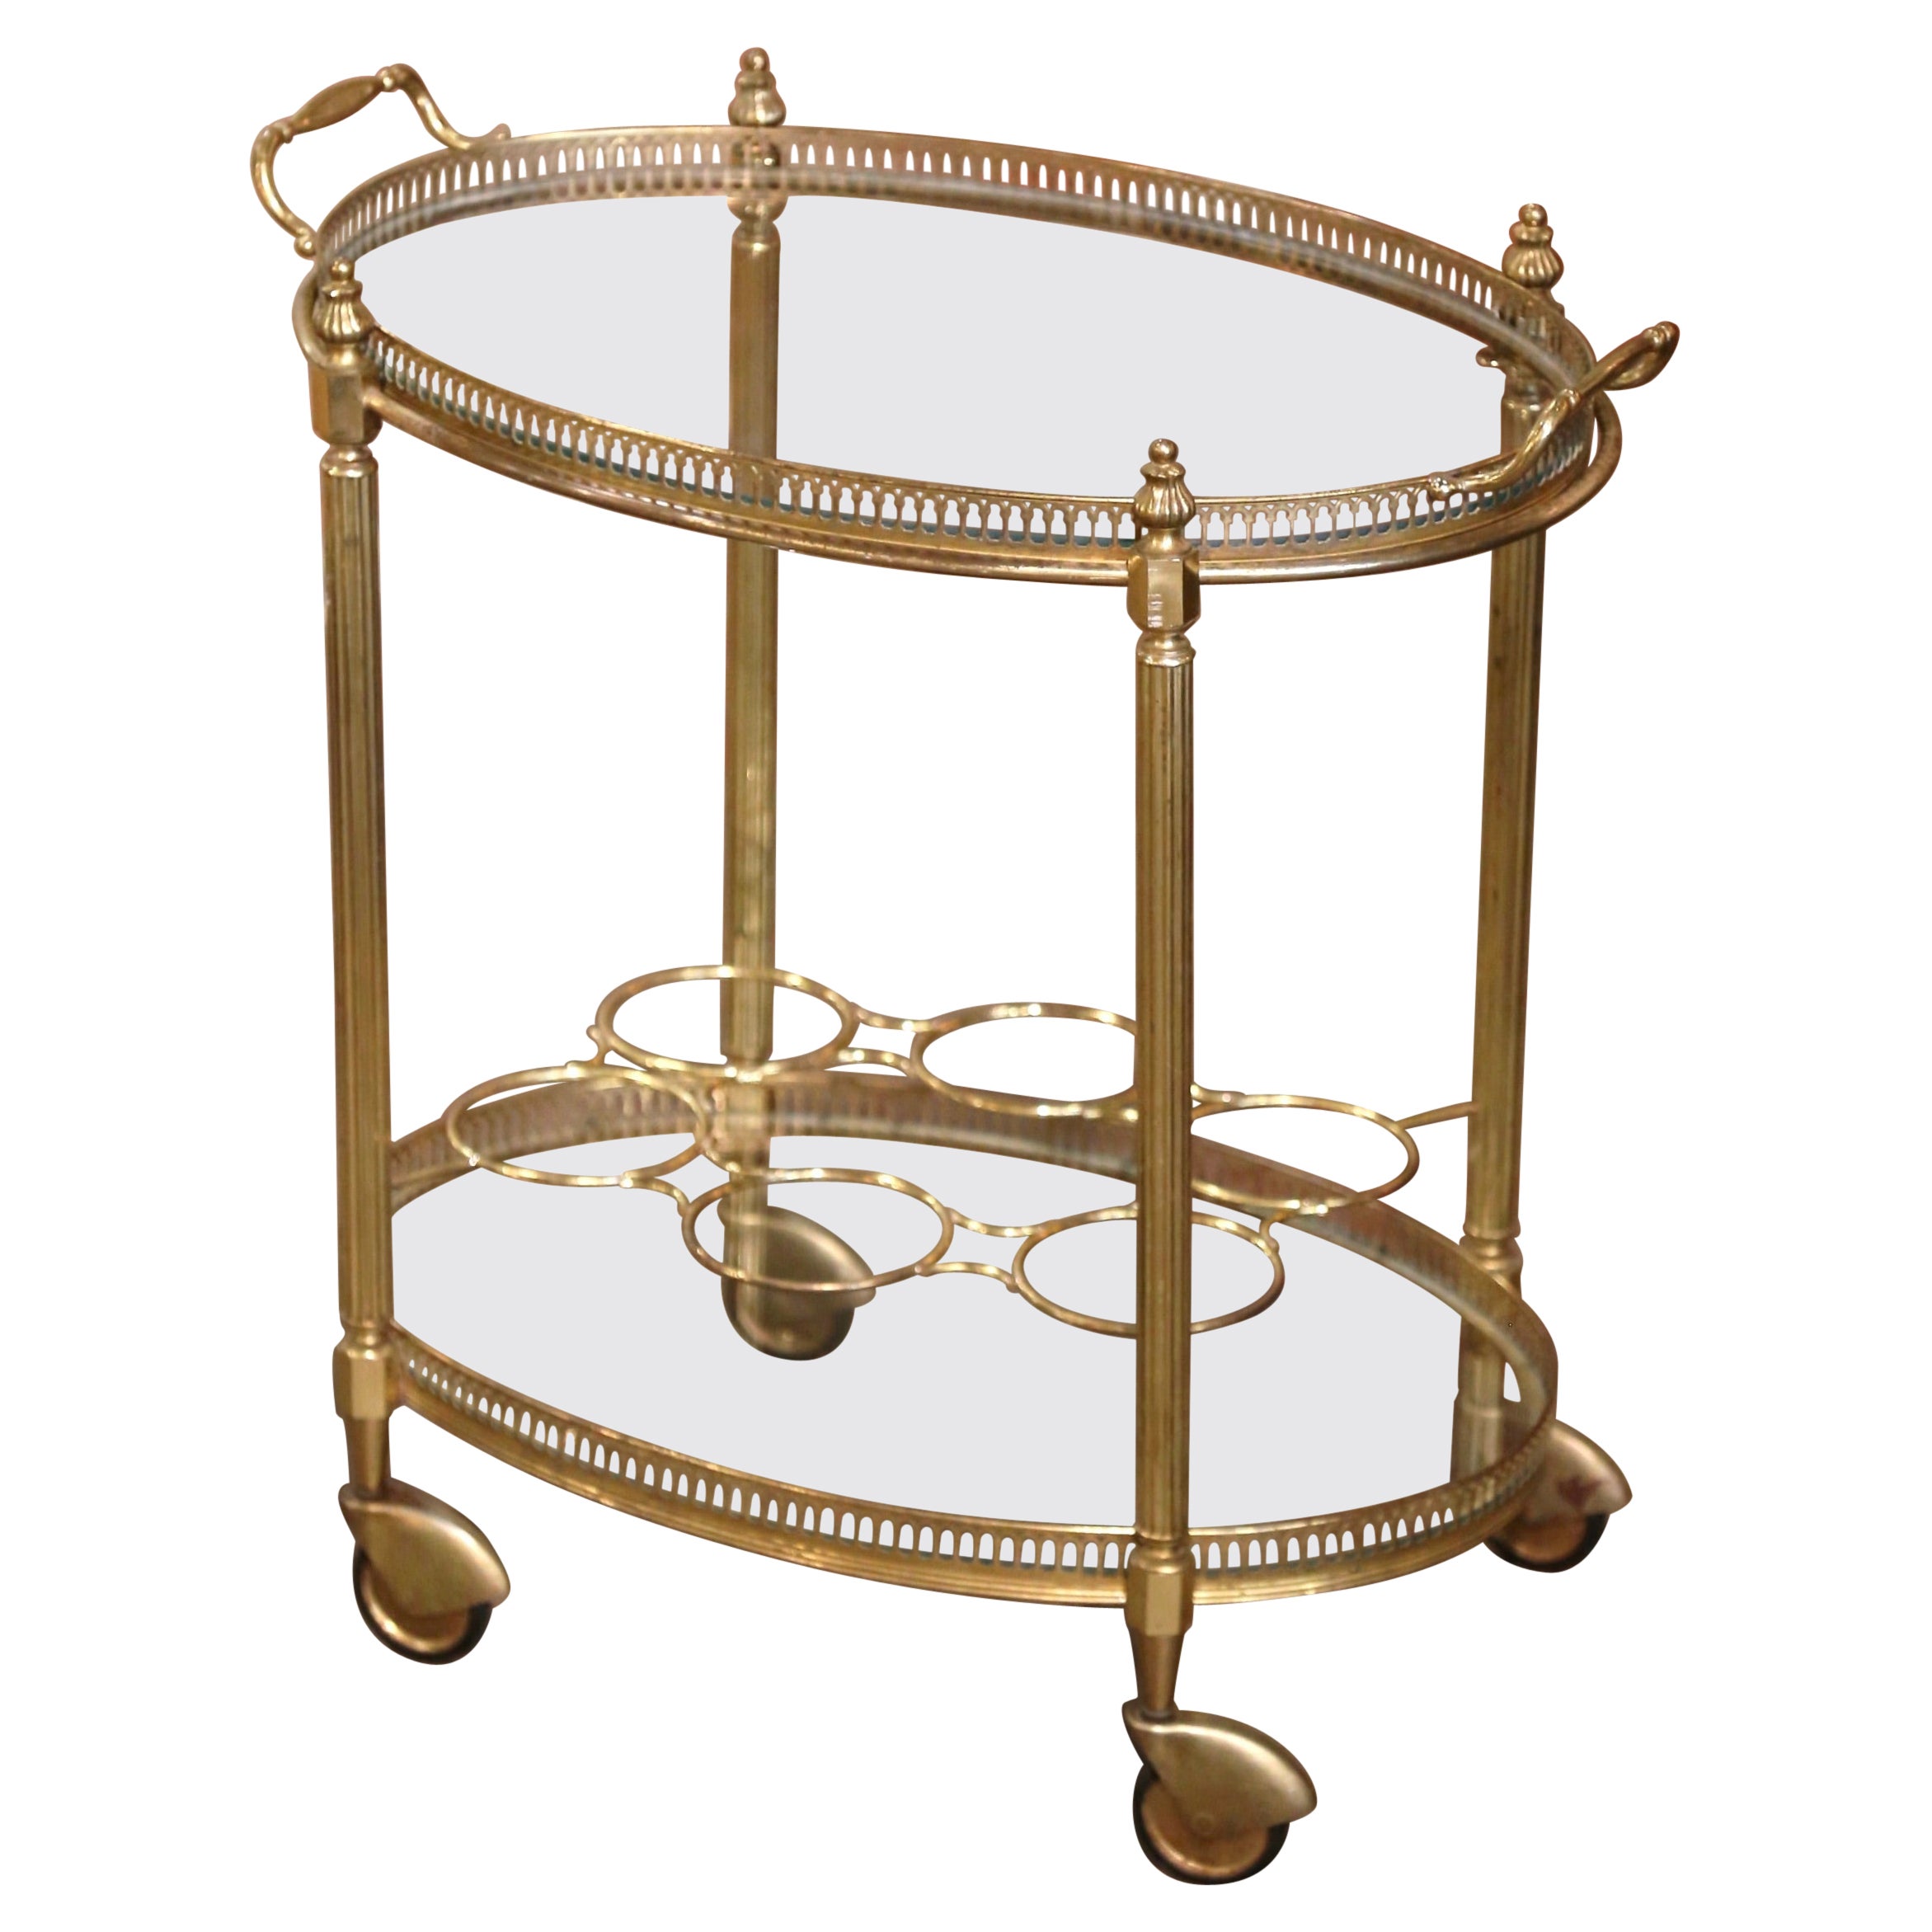 Mid-Century French Gilt Brass Oval Two-Tier Service Trolley Bar Cart on Castors